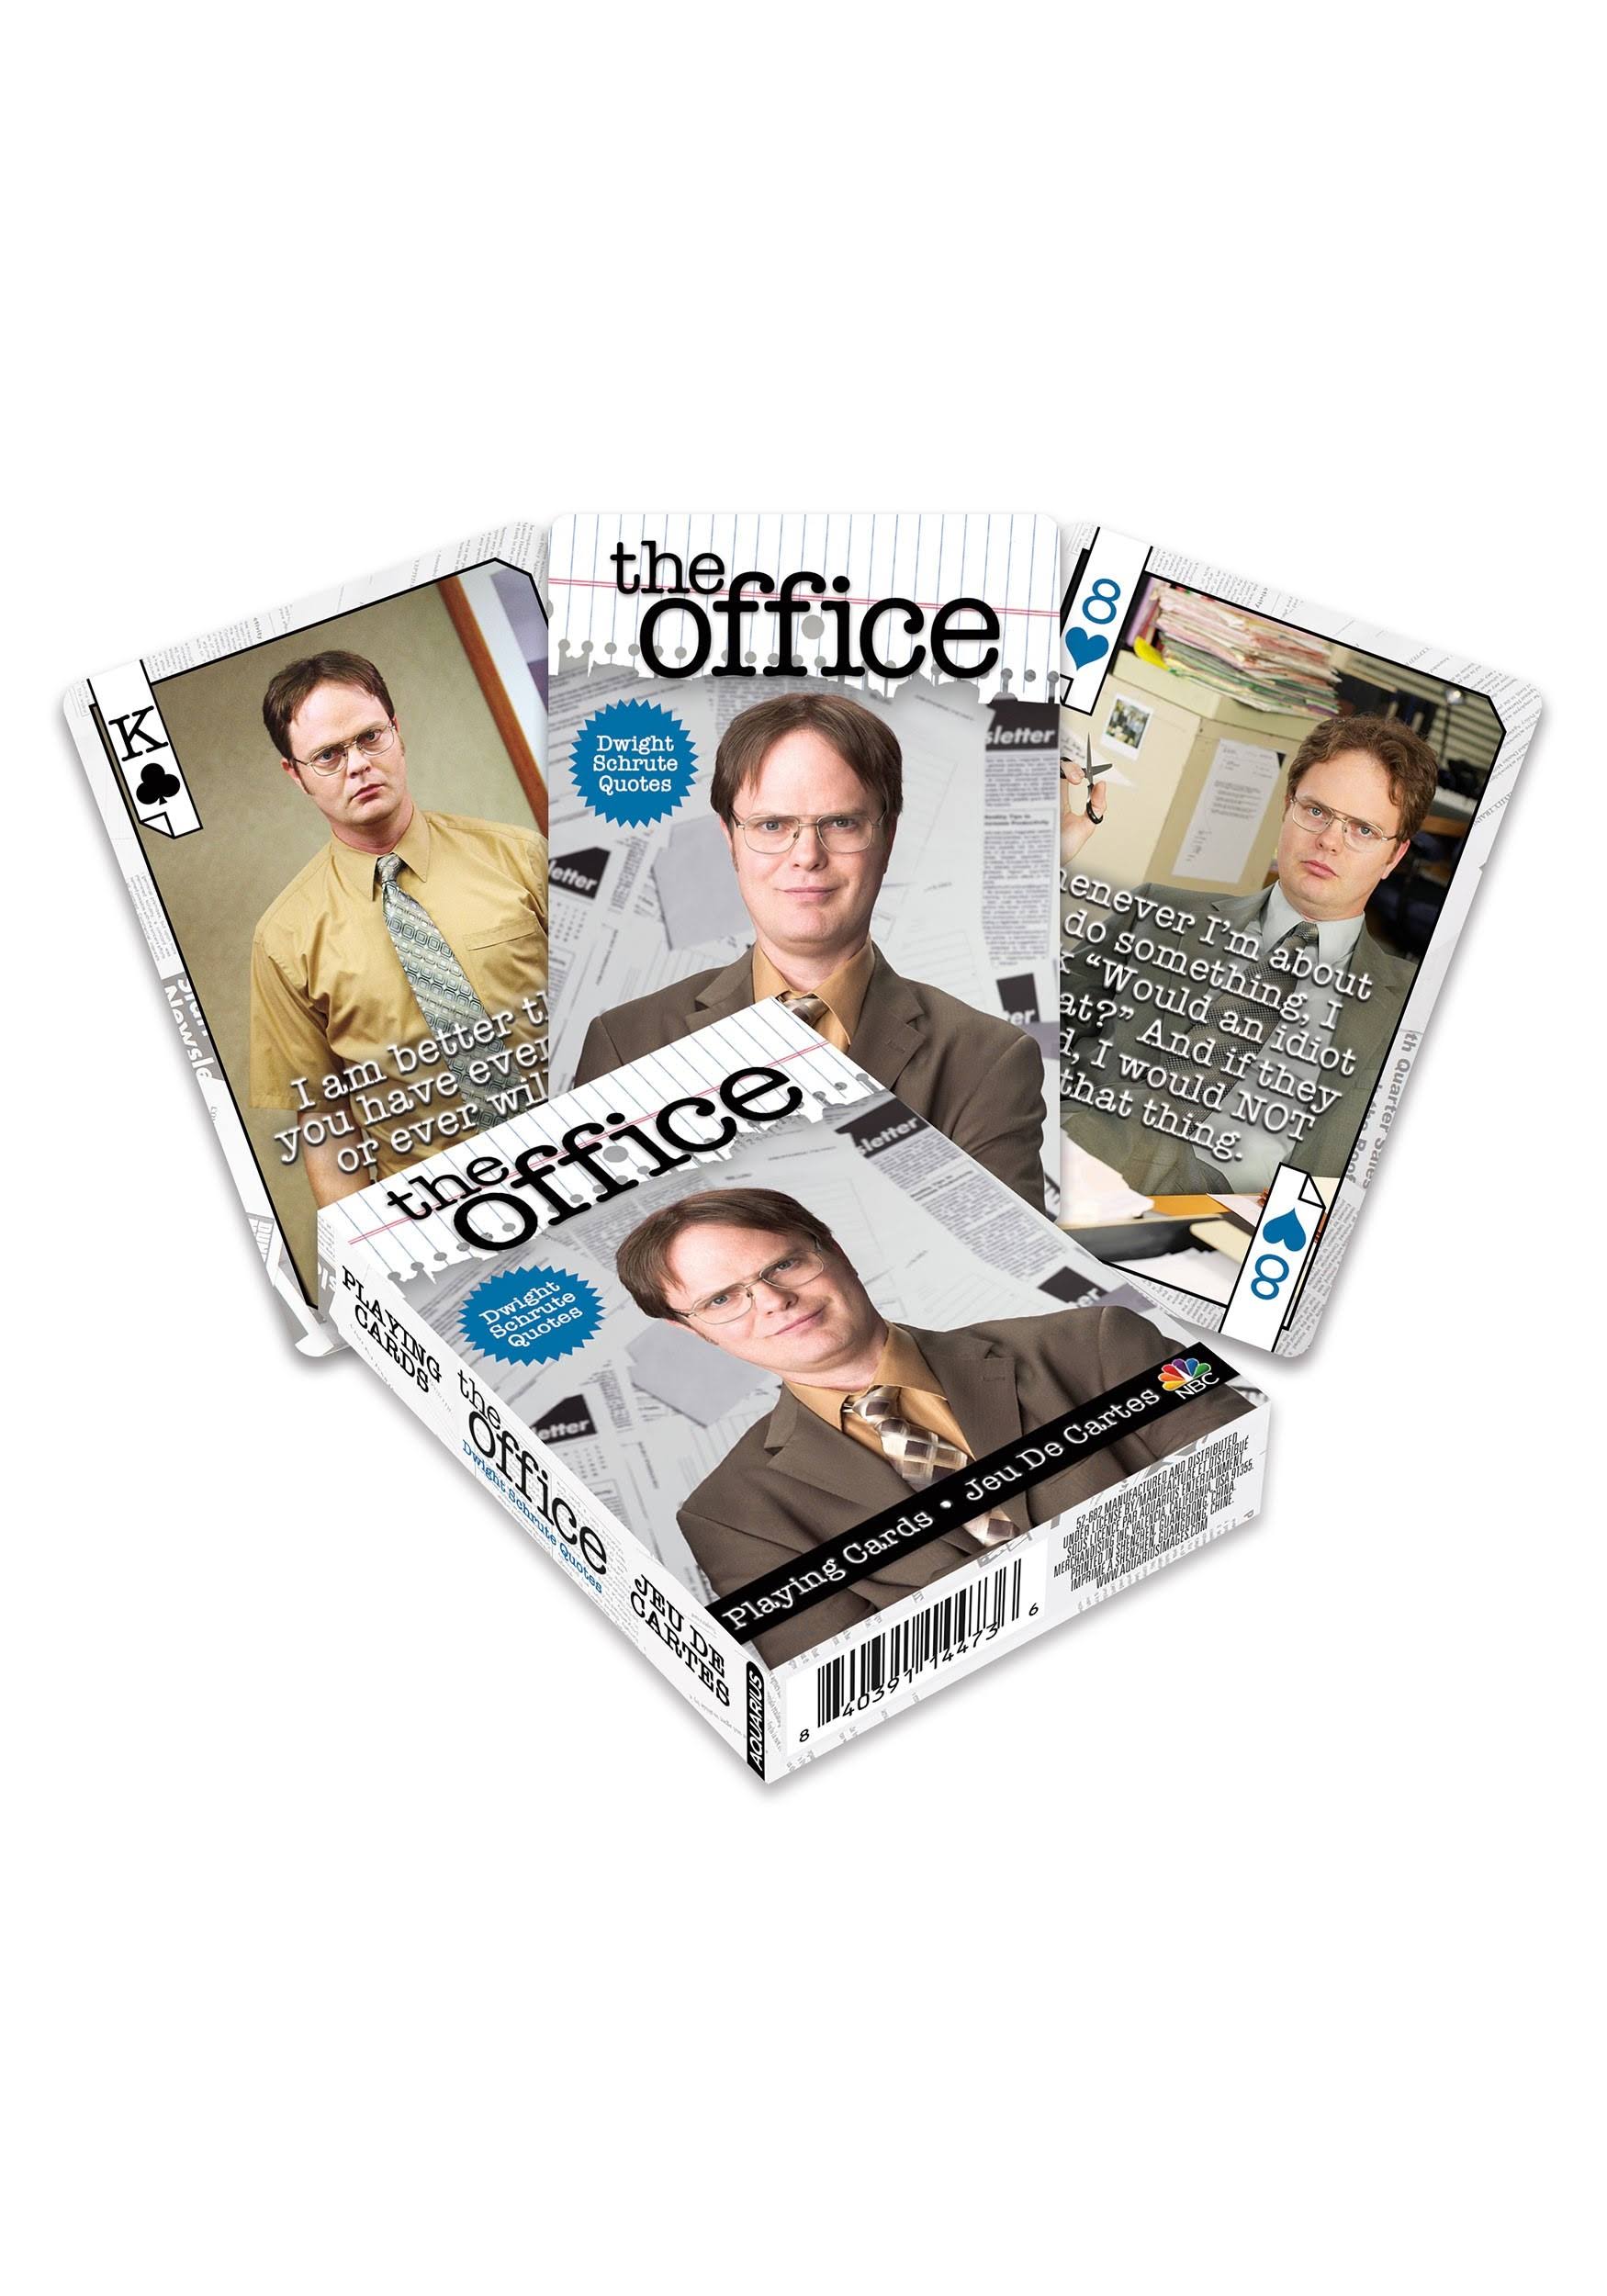 The Office - Dwight Quotes Playing Cards